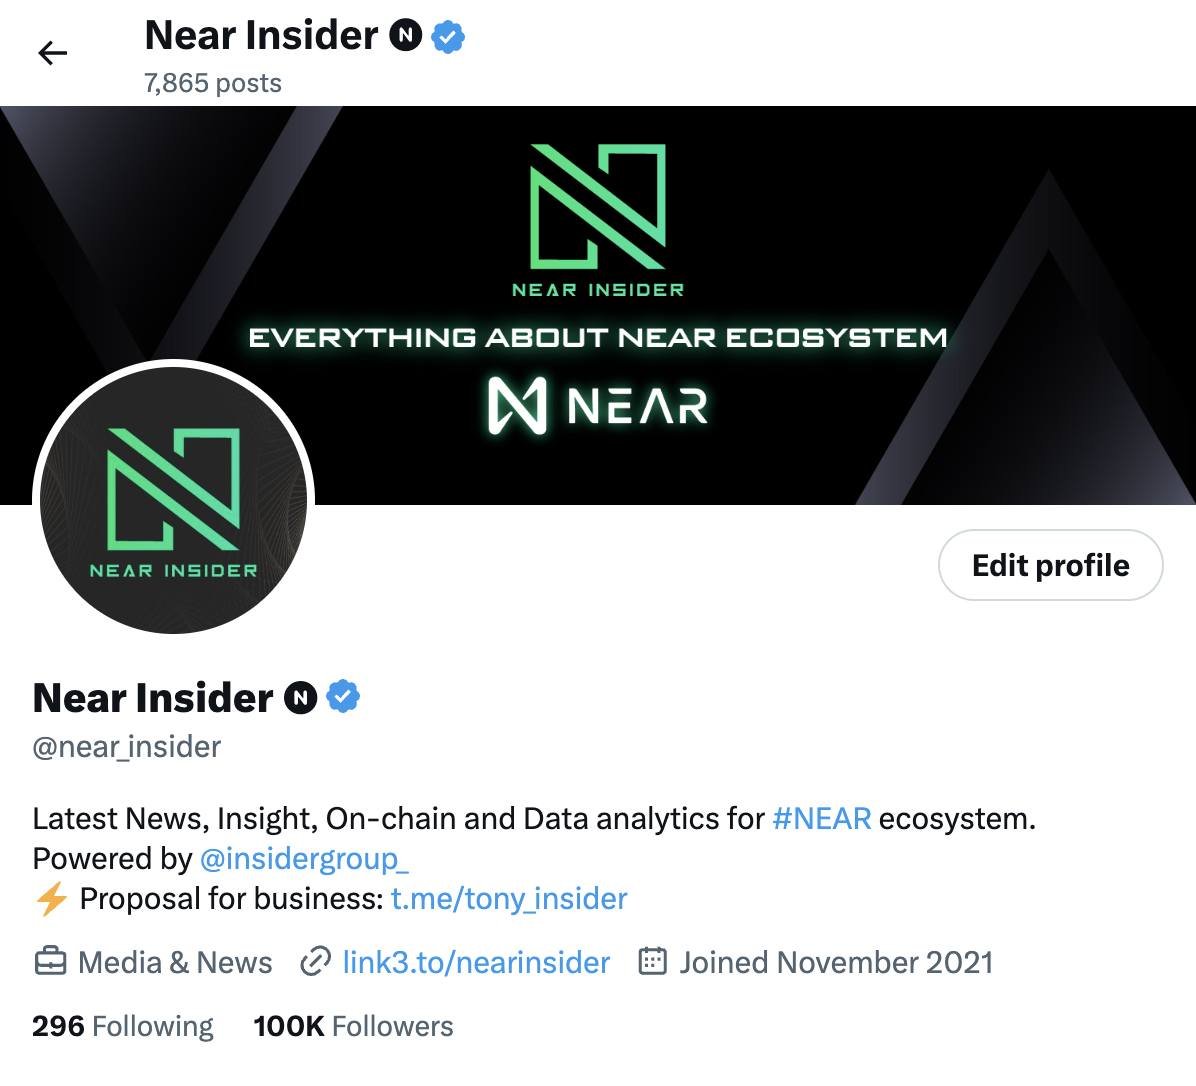 Thank you for 100,000 followers 🚀🚀🚀 Appreciate the efforts of contributors during 2 years of ups and downs with the market 🙏🙏🙏 IN NEAR WE STILL TRUST 🔥 Keep building 💪 #NEAR